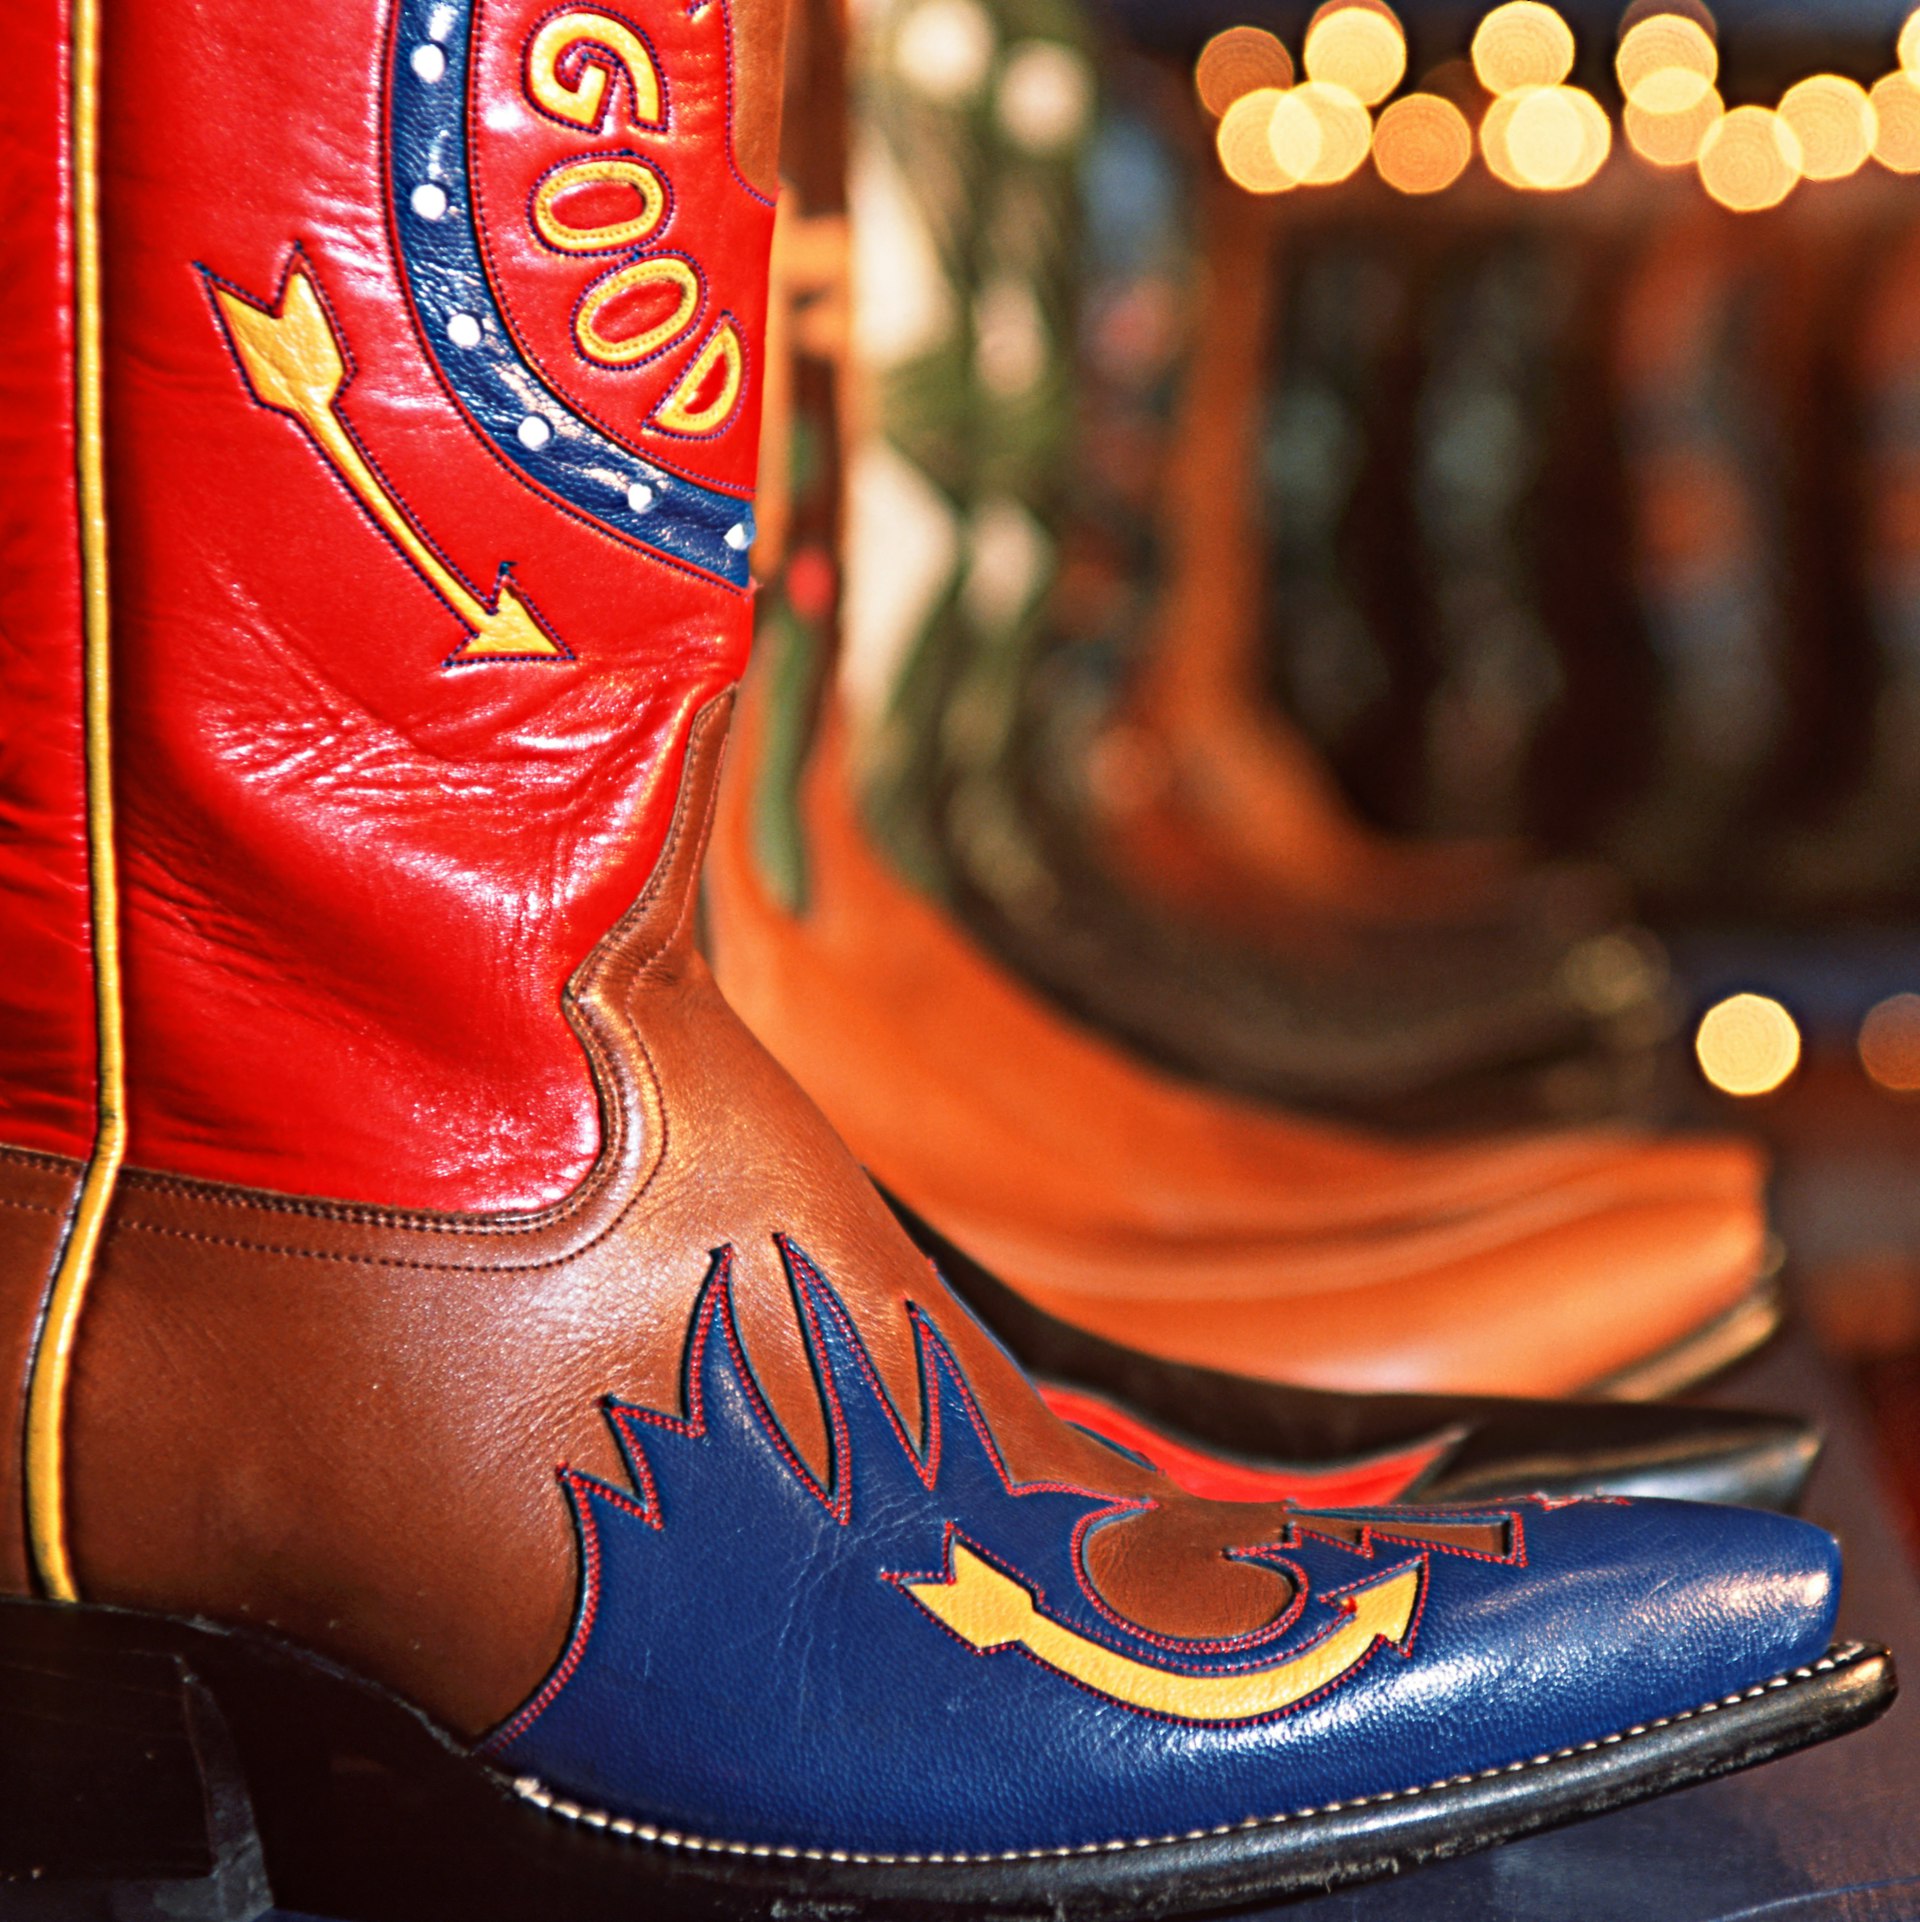 A pair of red and blue cowboy boots at Rocketbuster Boots, El Paso, Texas, USA